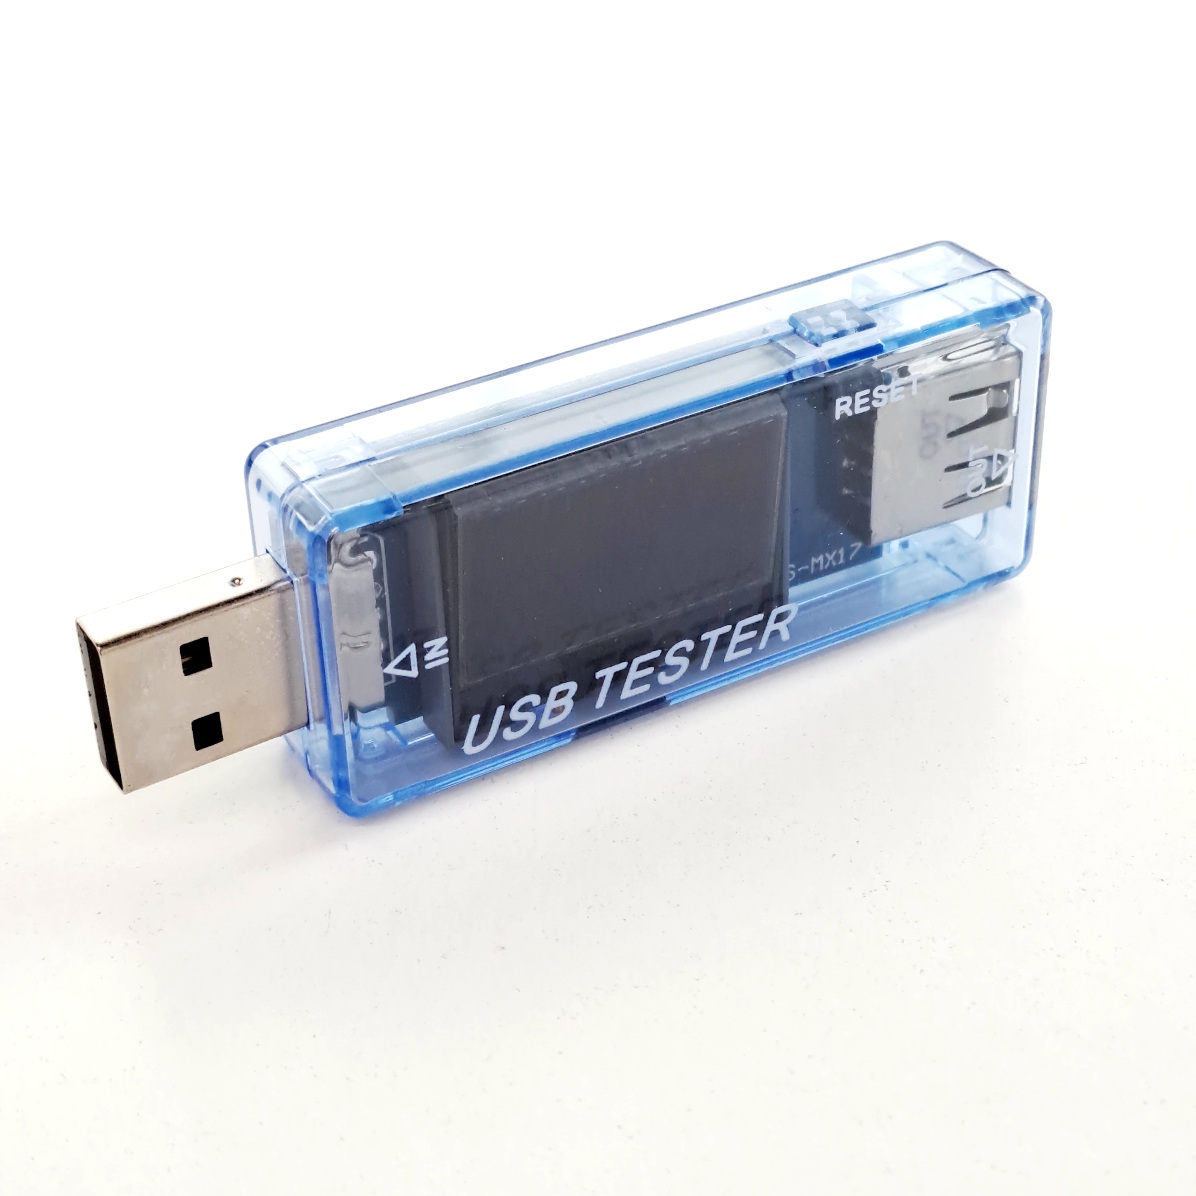 USB Tester with LCD MX17